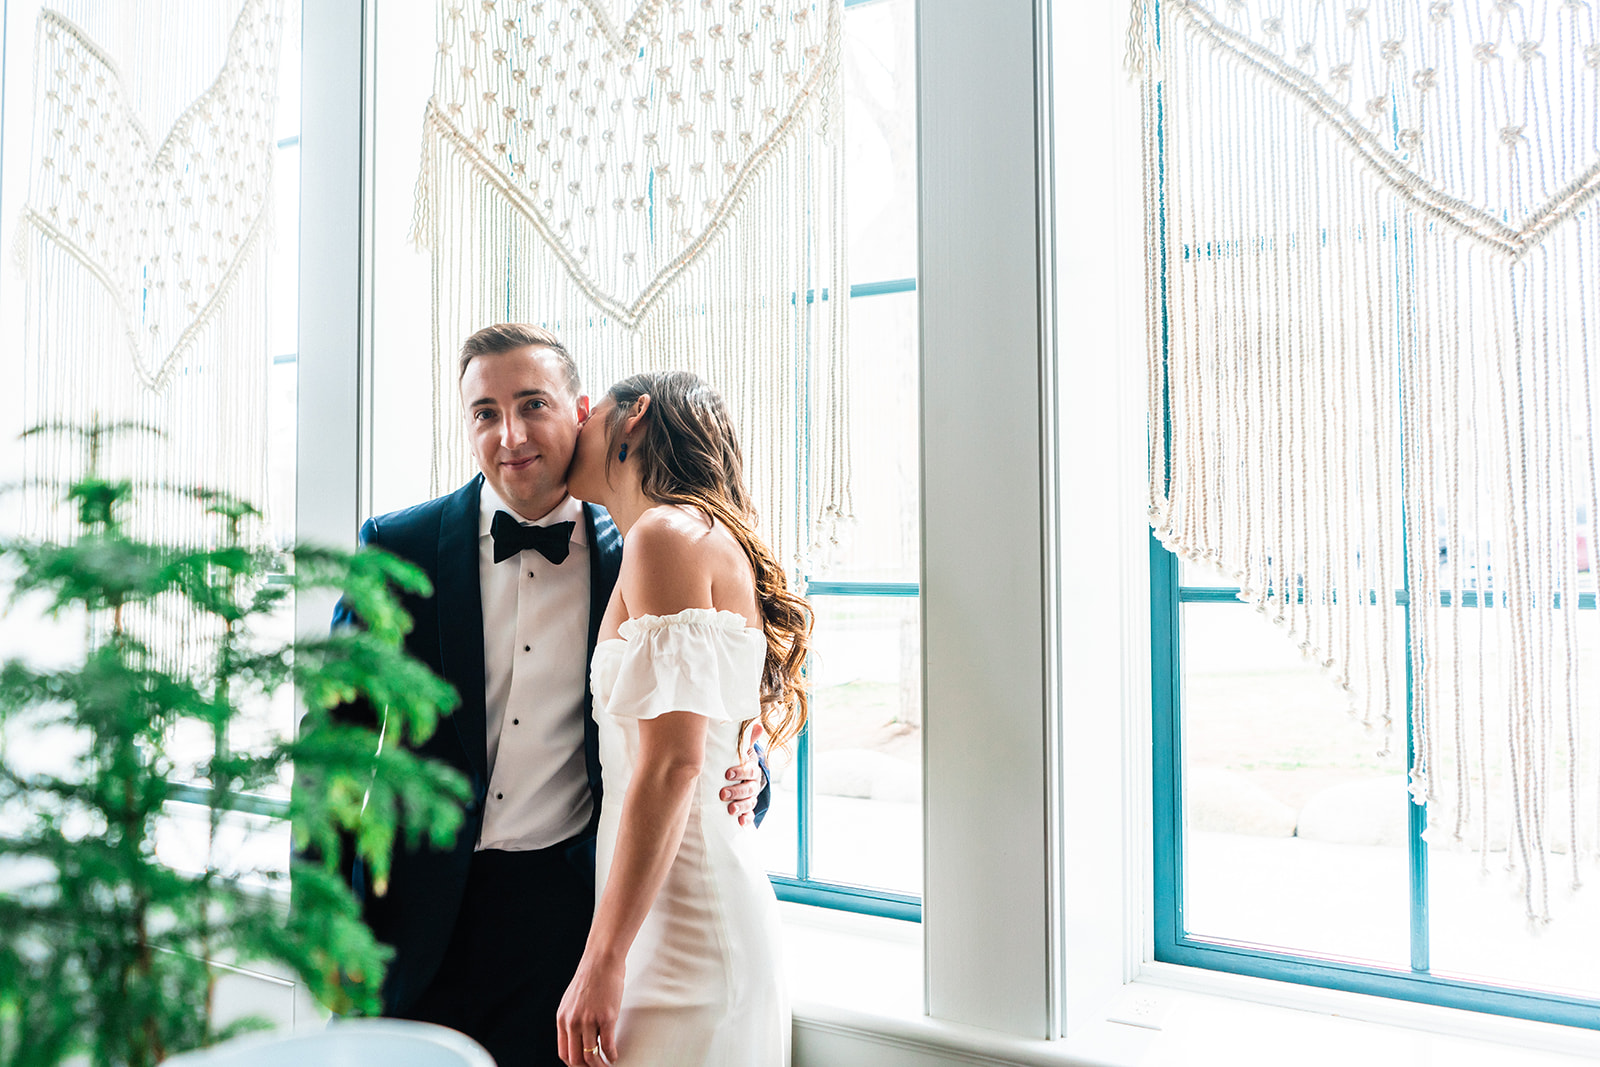 A bride kissing a groom on the cheek by a window adorned with macramé hangings during their Buena Vista elopement in Colorado at the Surf Hotel.